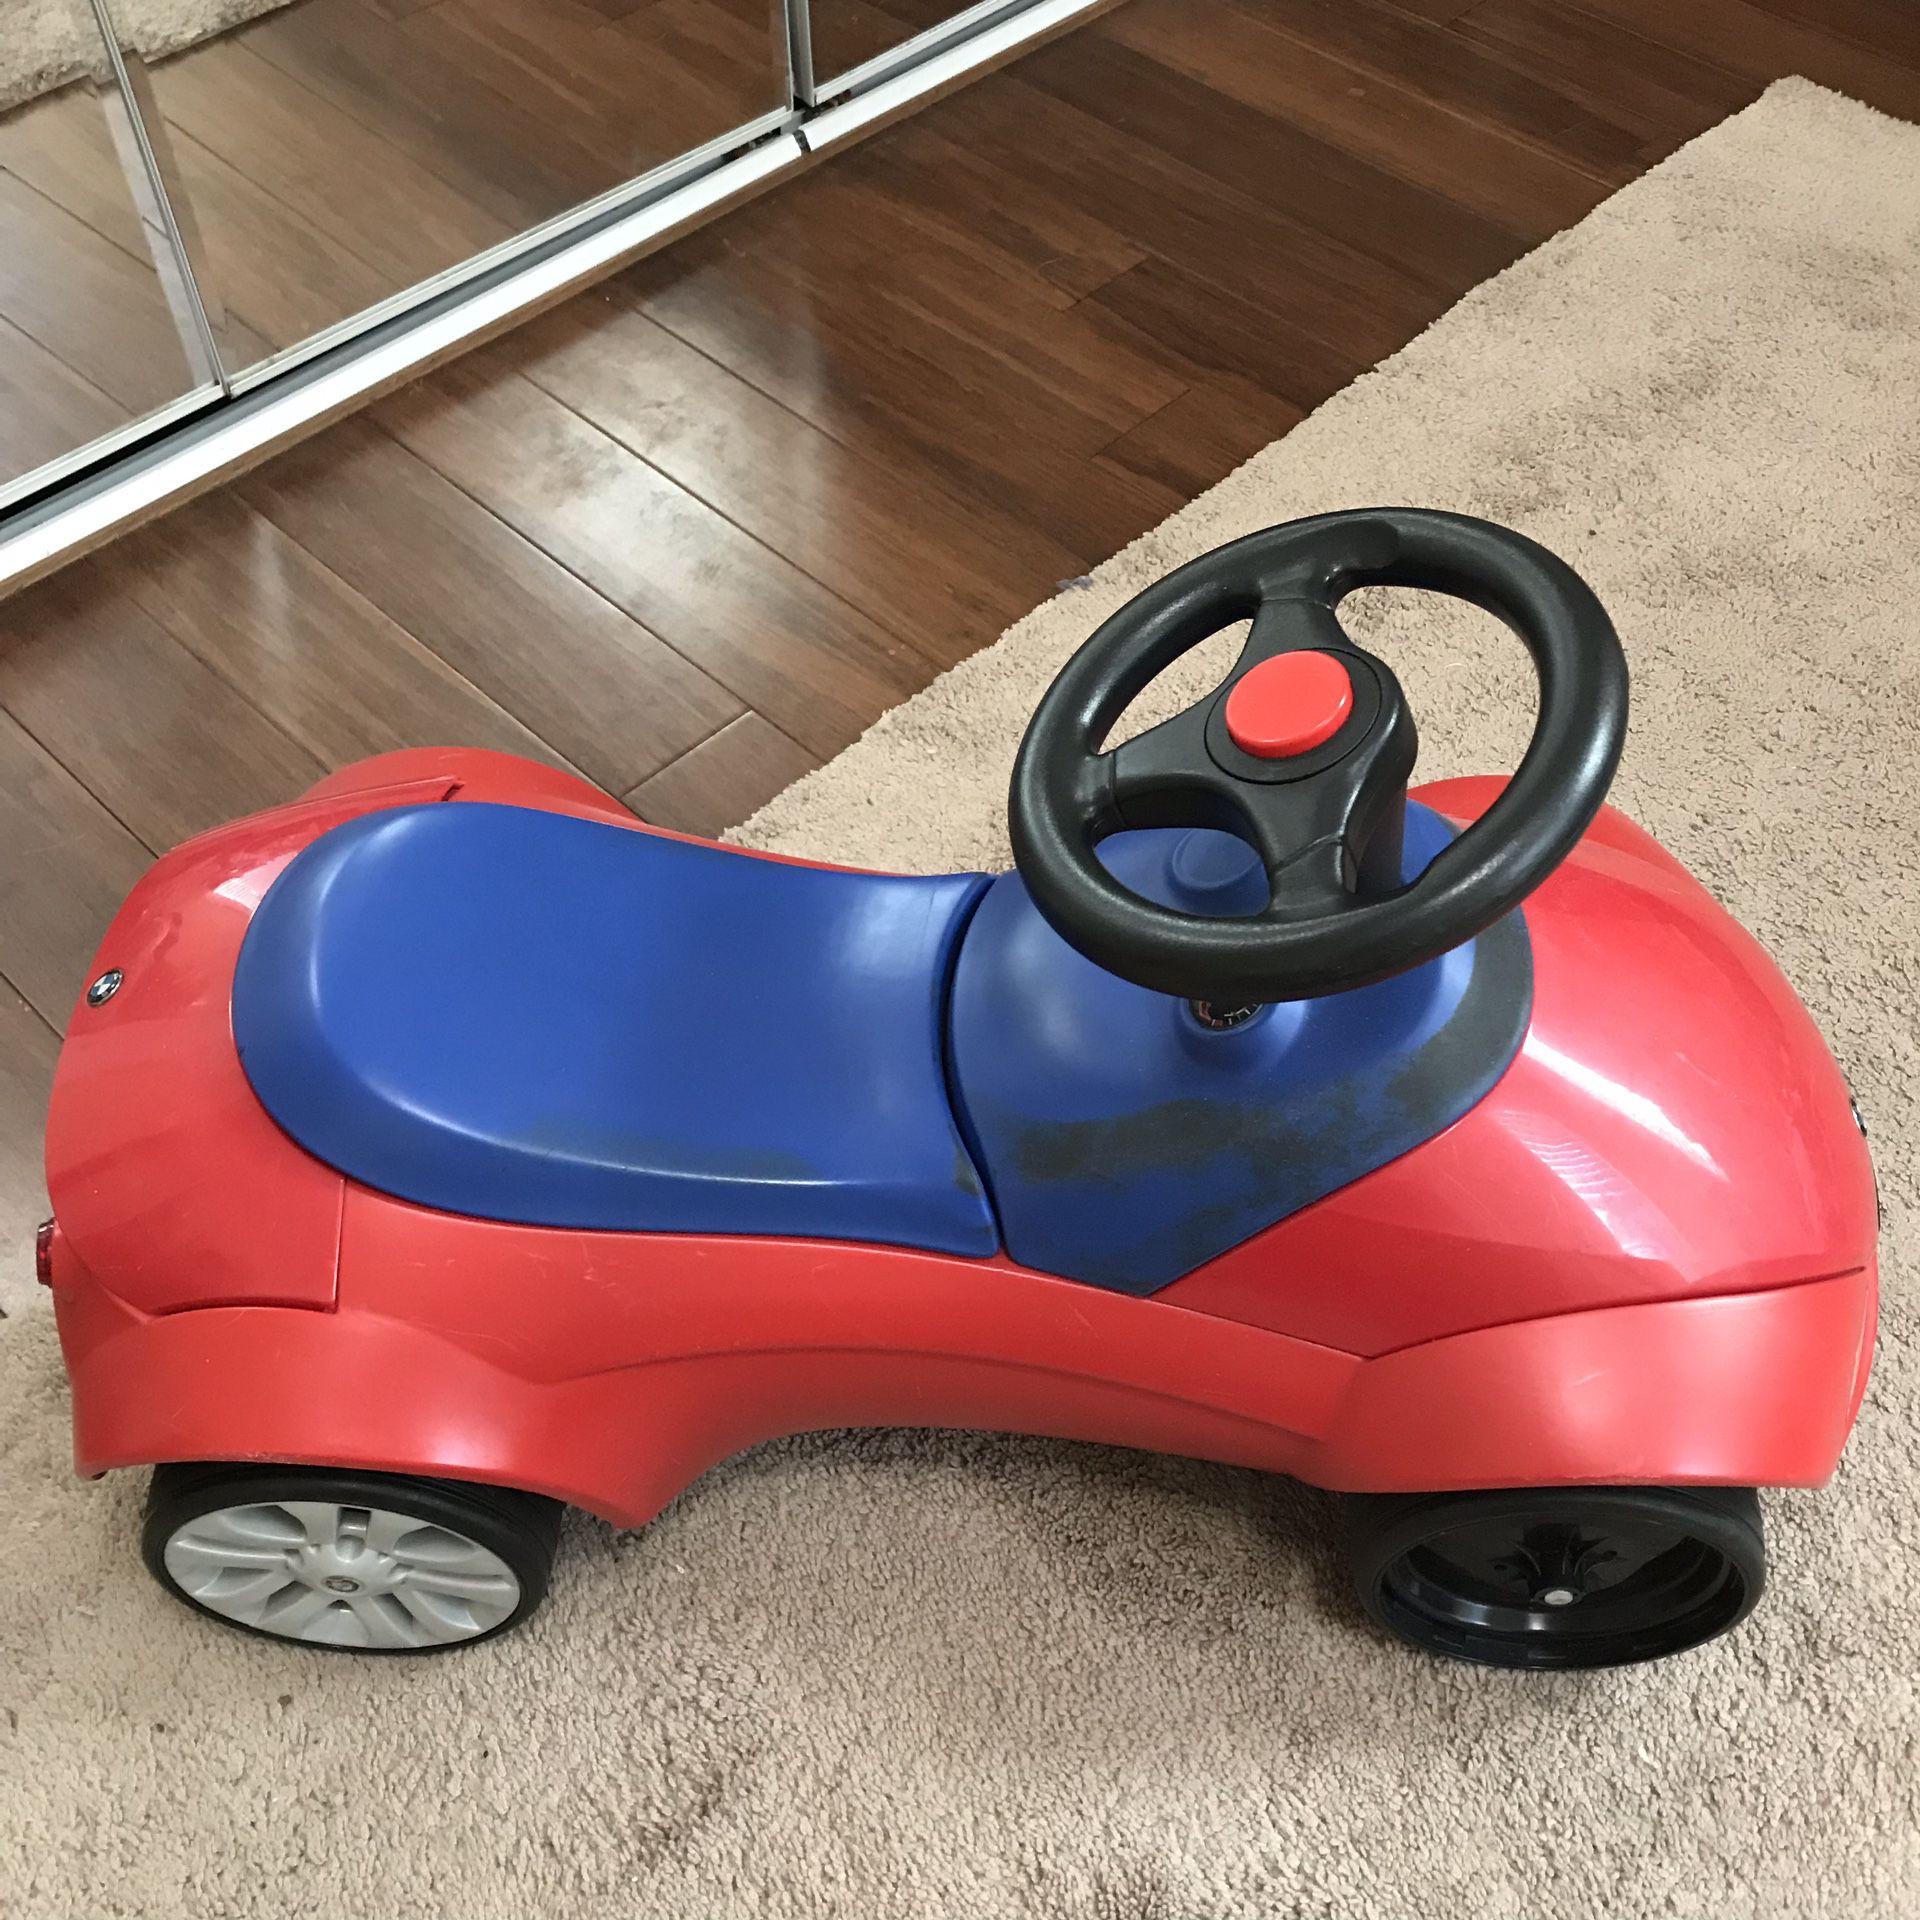 BMW Baby Racer Ride On Car Toy